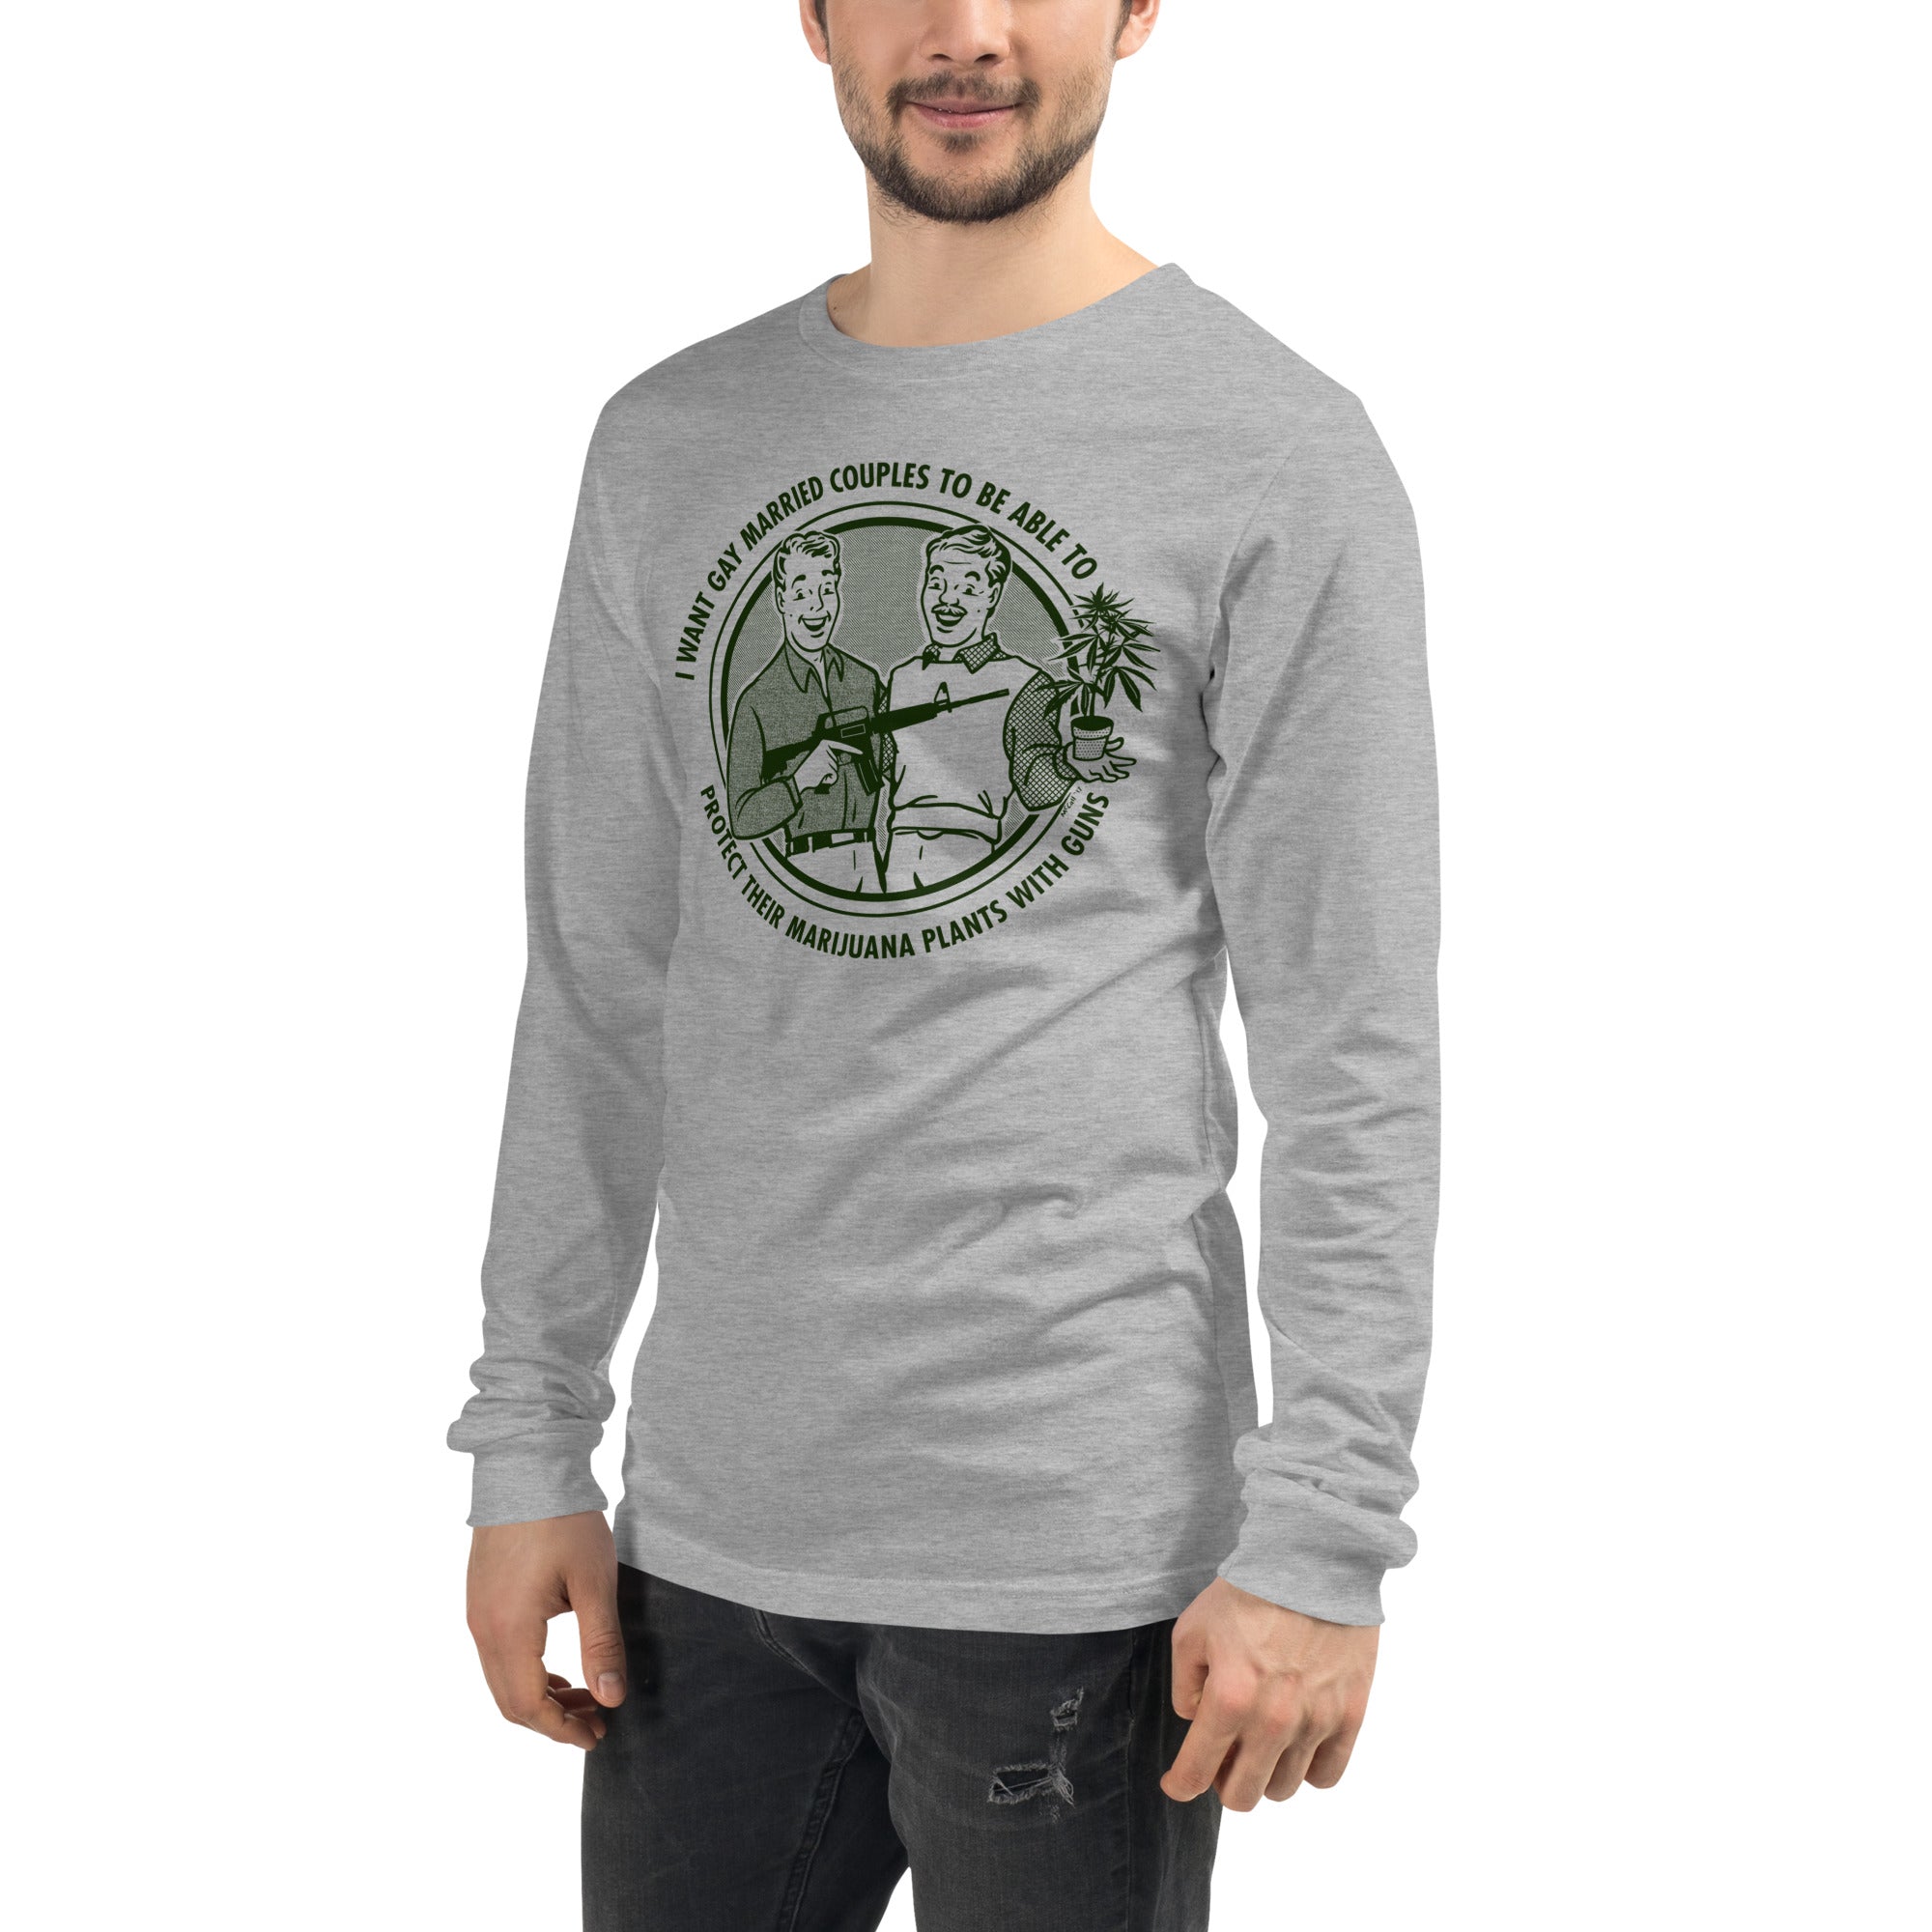 I Want Gay Married Couples to Protect Their Marijuana Plants with Guns Long Sleeve T-Shirt